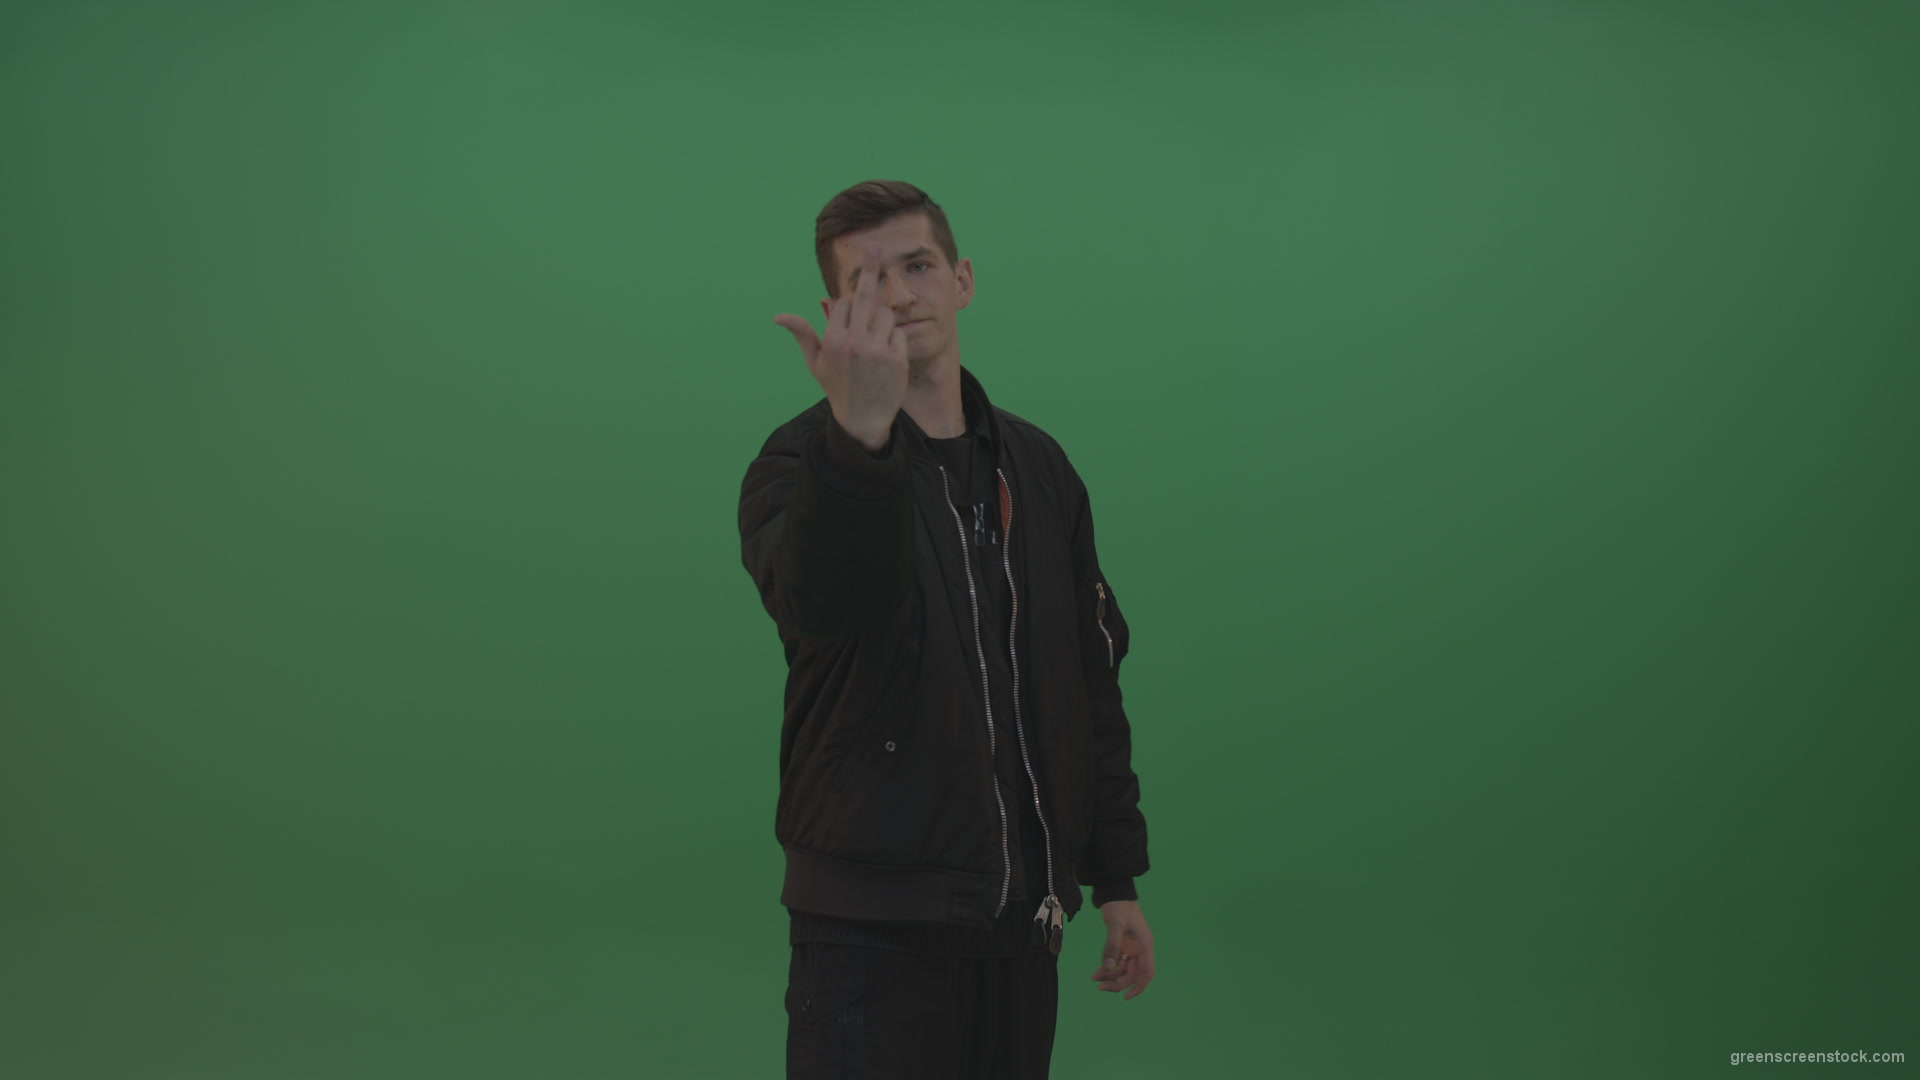 Boy-in-black-wear-displays-the-kill-sign-and-two-middle-fingers-in-the-air-over-chromakey-background_004 Green Screen Stock